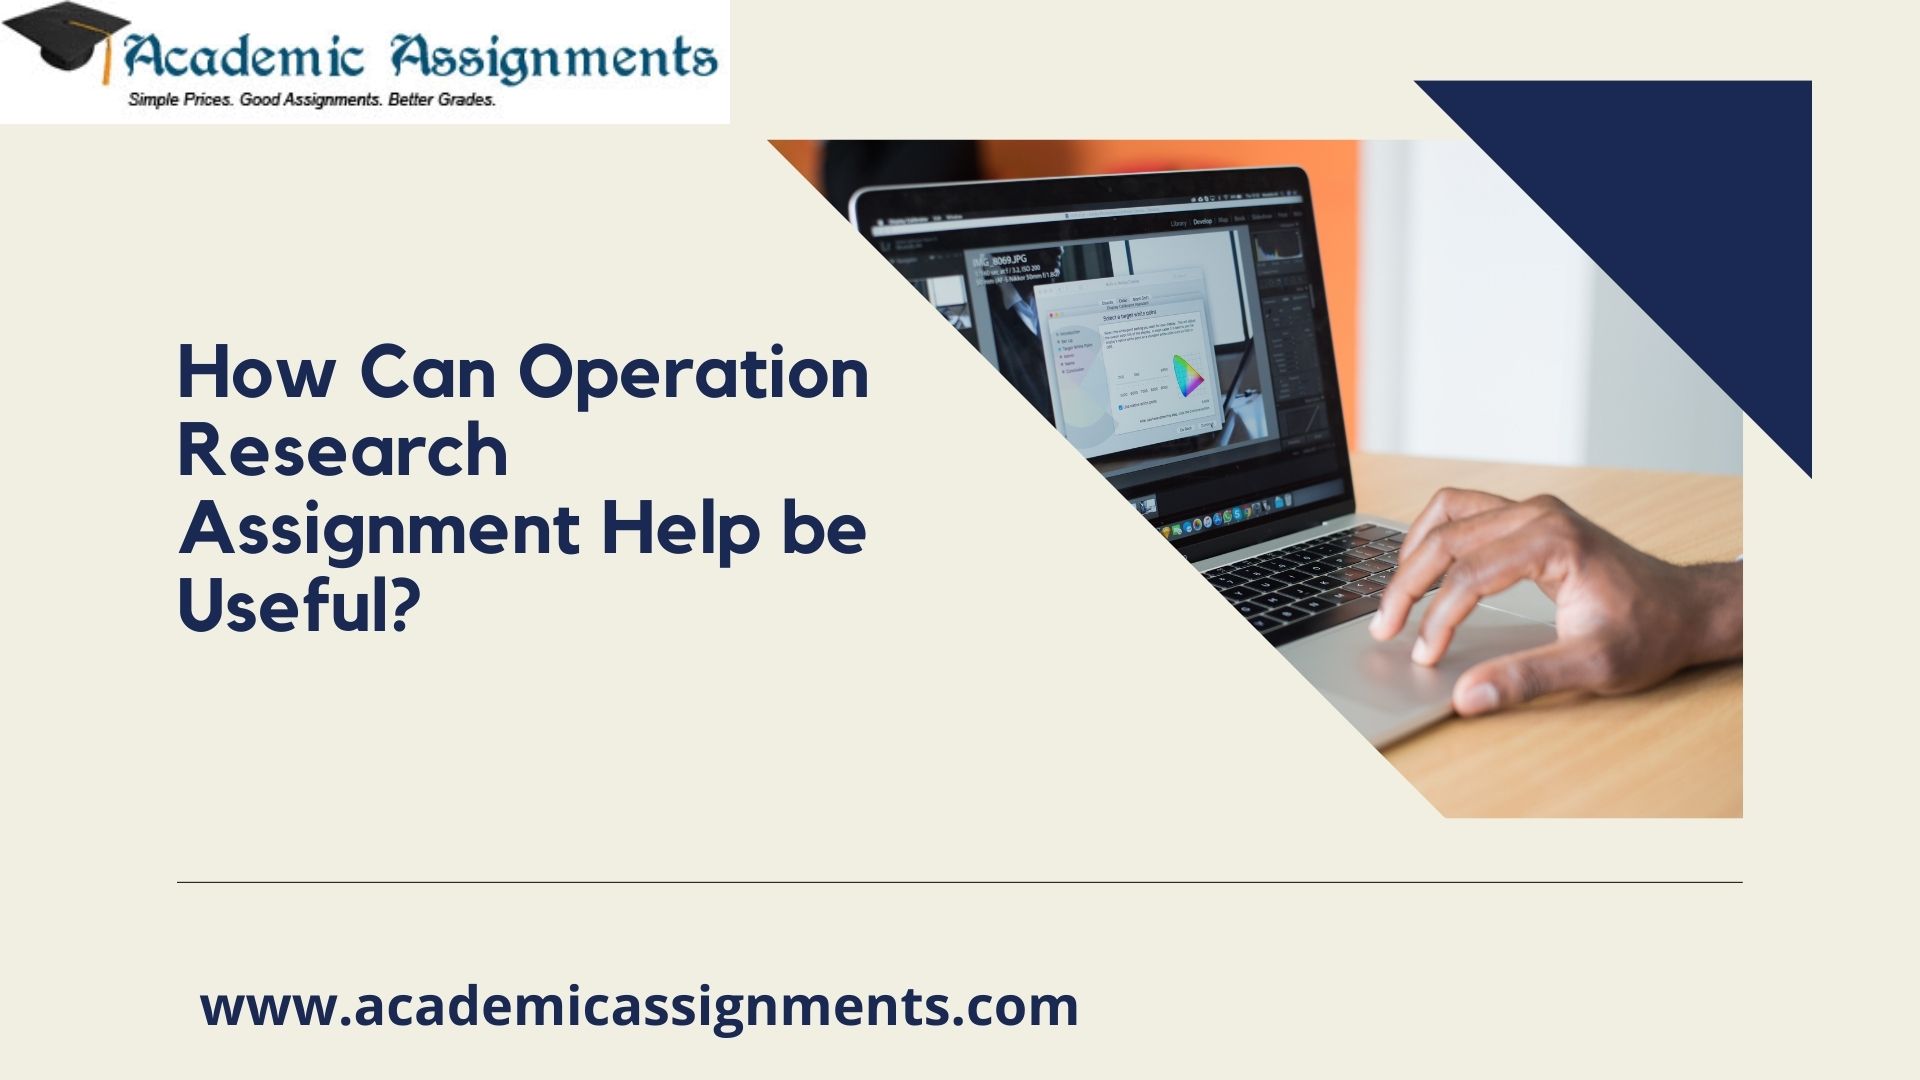 How Can Operation Research Assignment Help be Useful